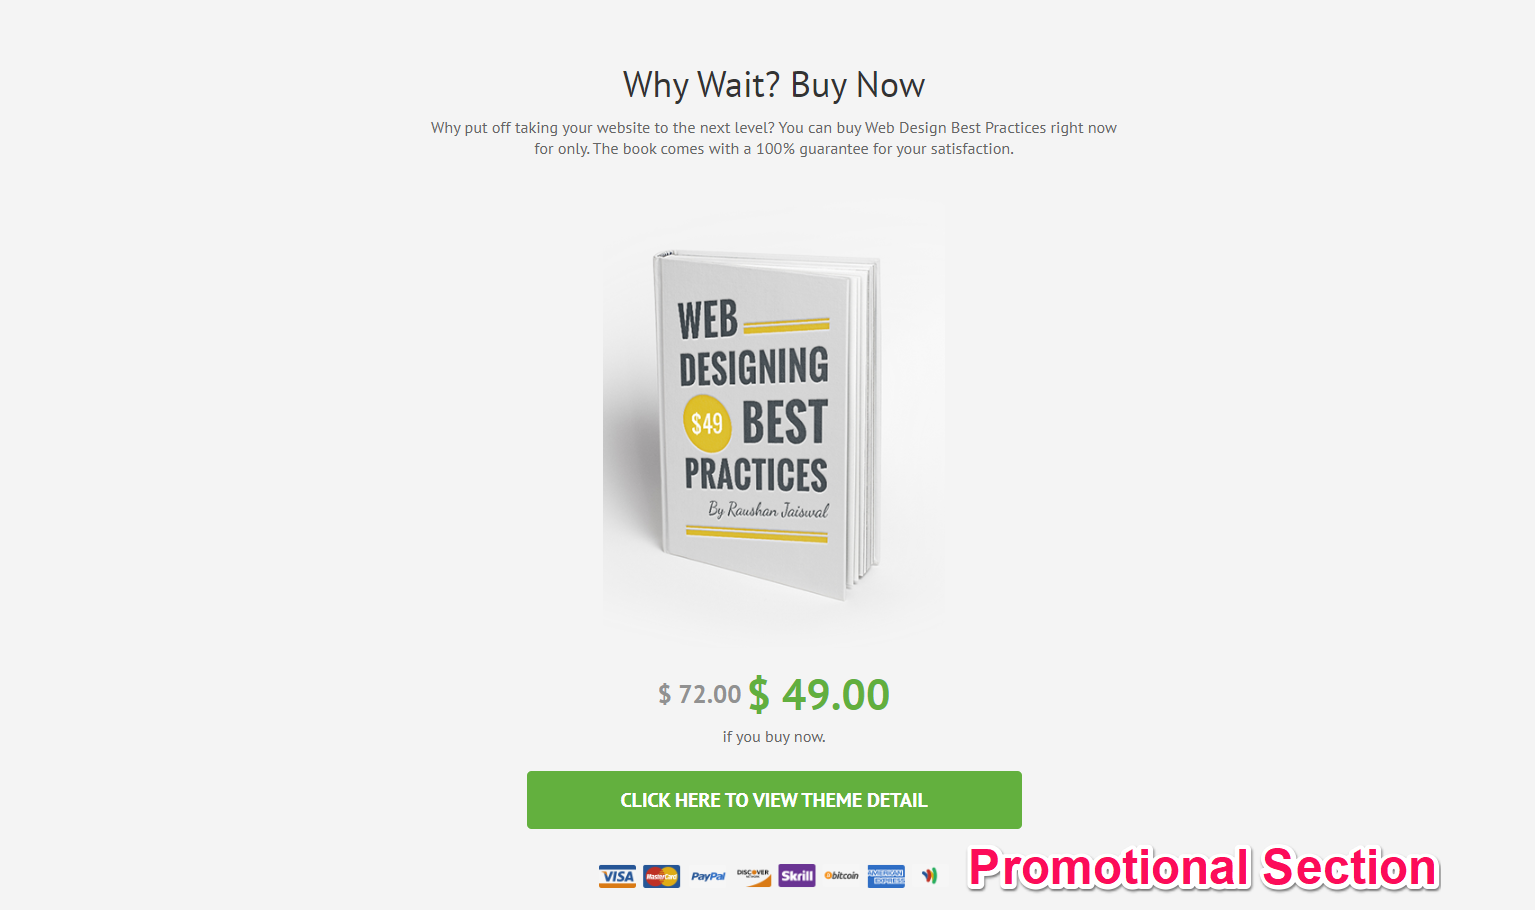 Promotional Section book landing page